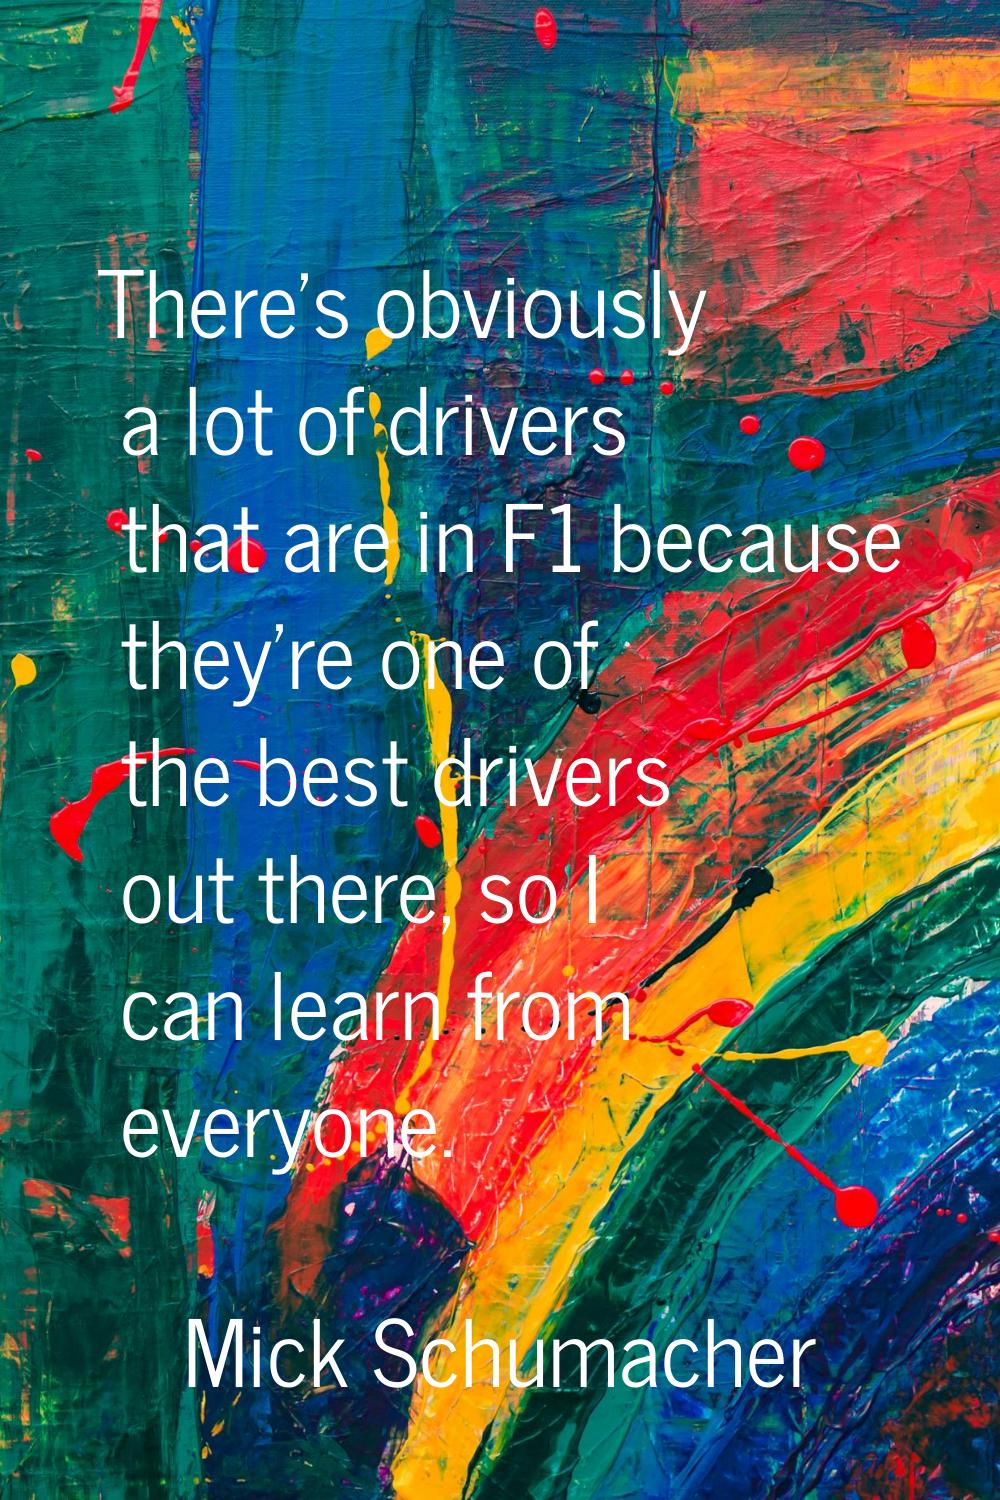 There's obviously a lot of drivers that are in F1 because they're one of the best drivers out there